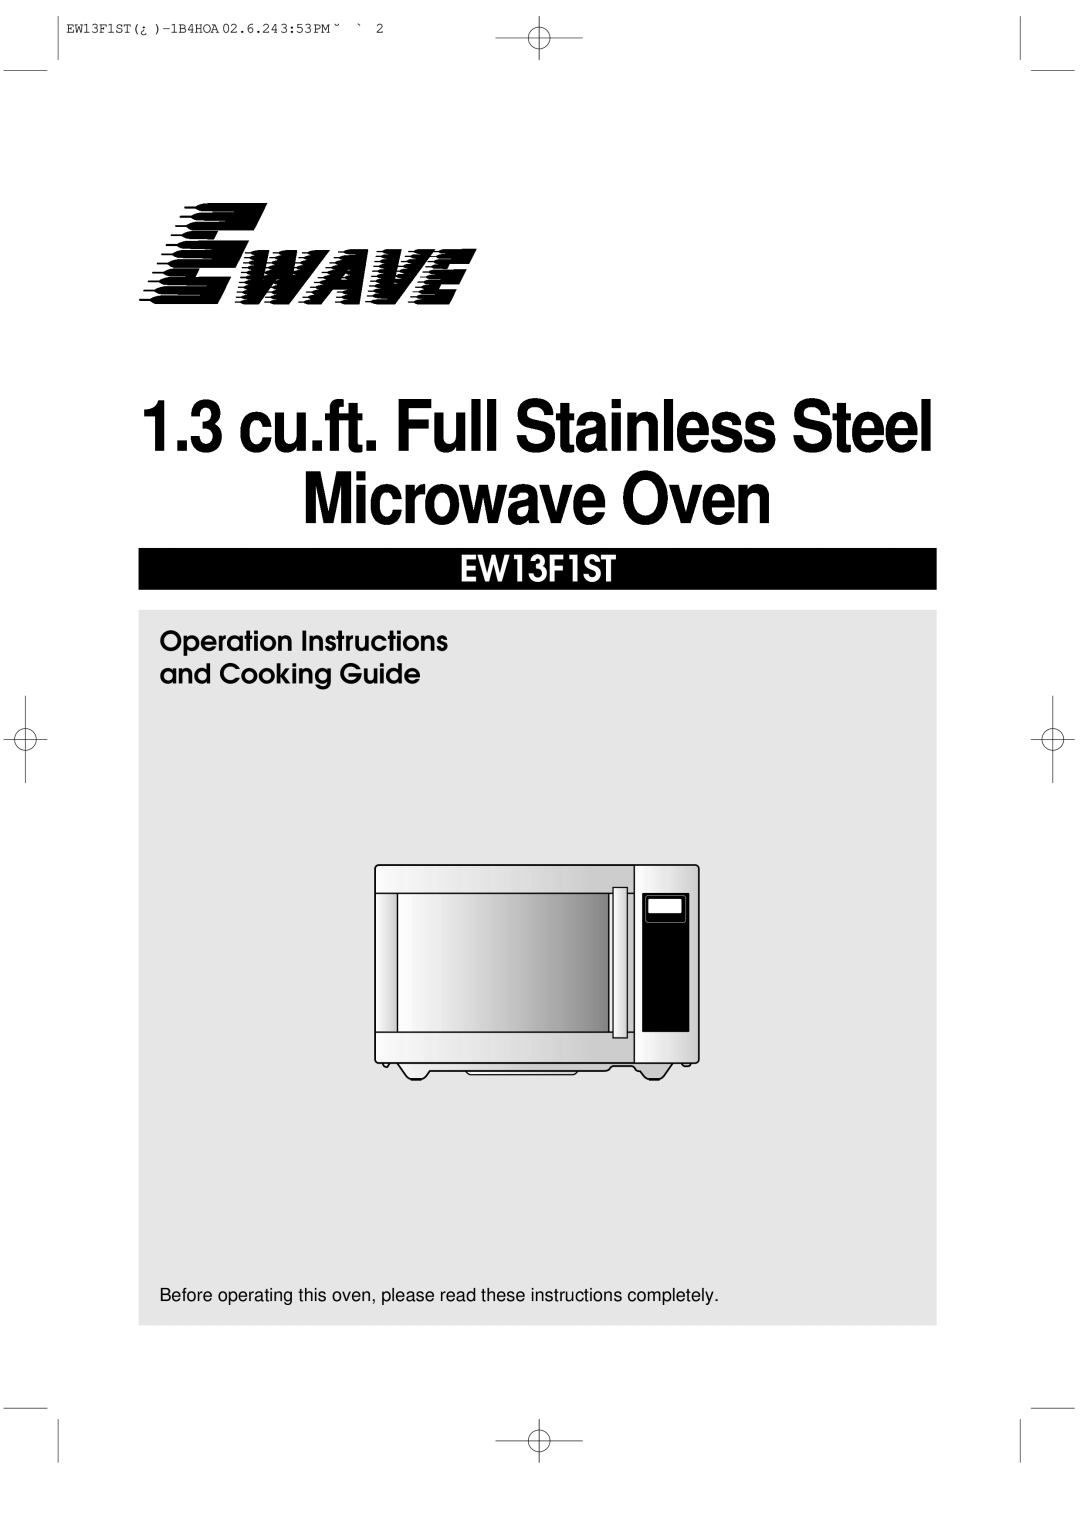 Daewoo EW13F1ST manual Microwave Oven, 1.3 cu.ft. Full Stainless Steel, Operation Instructions and Cooking Guide 